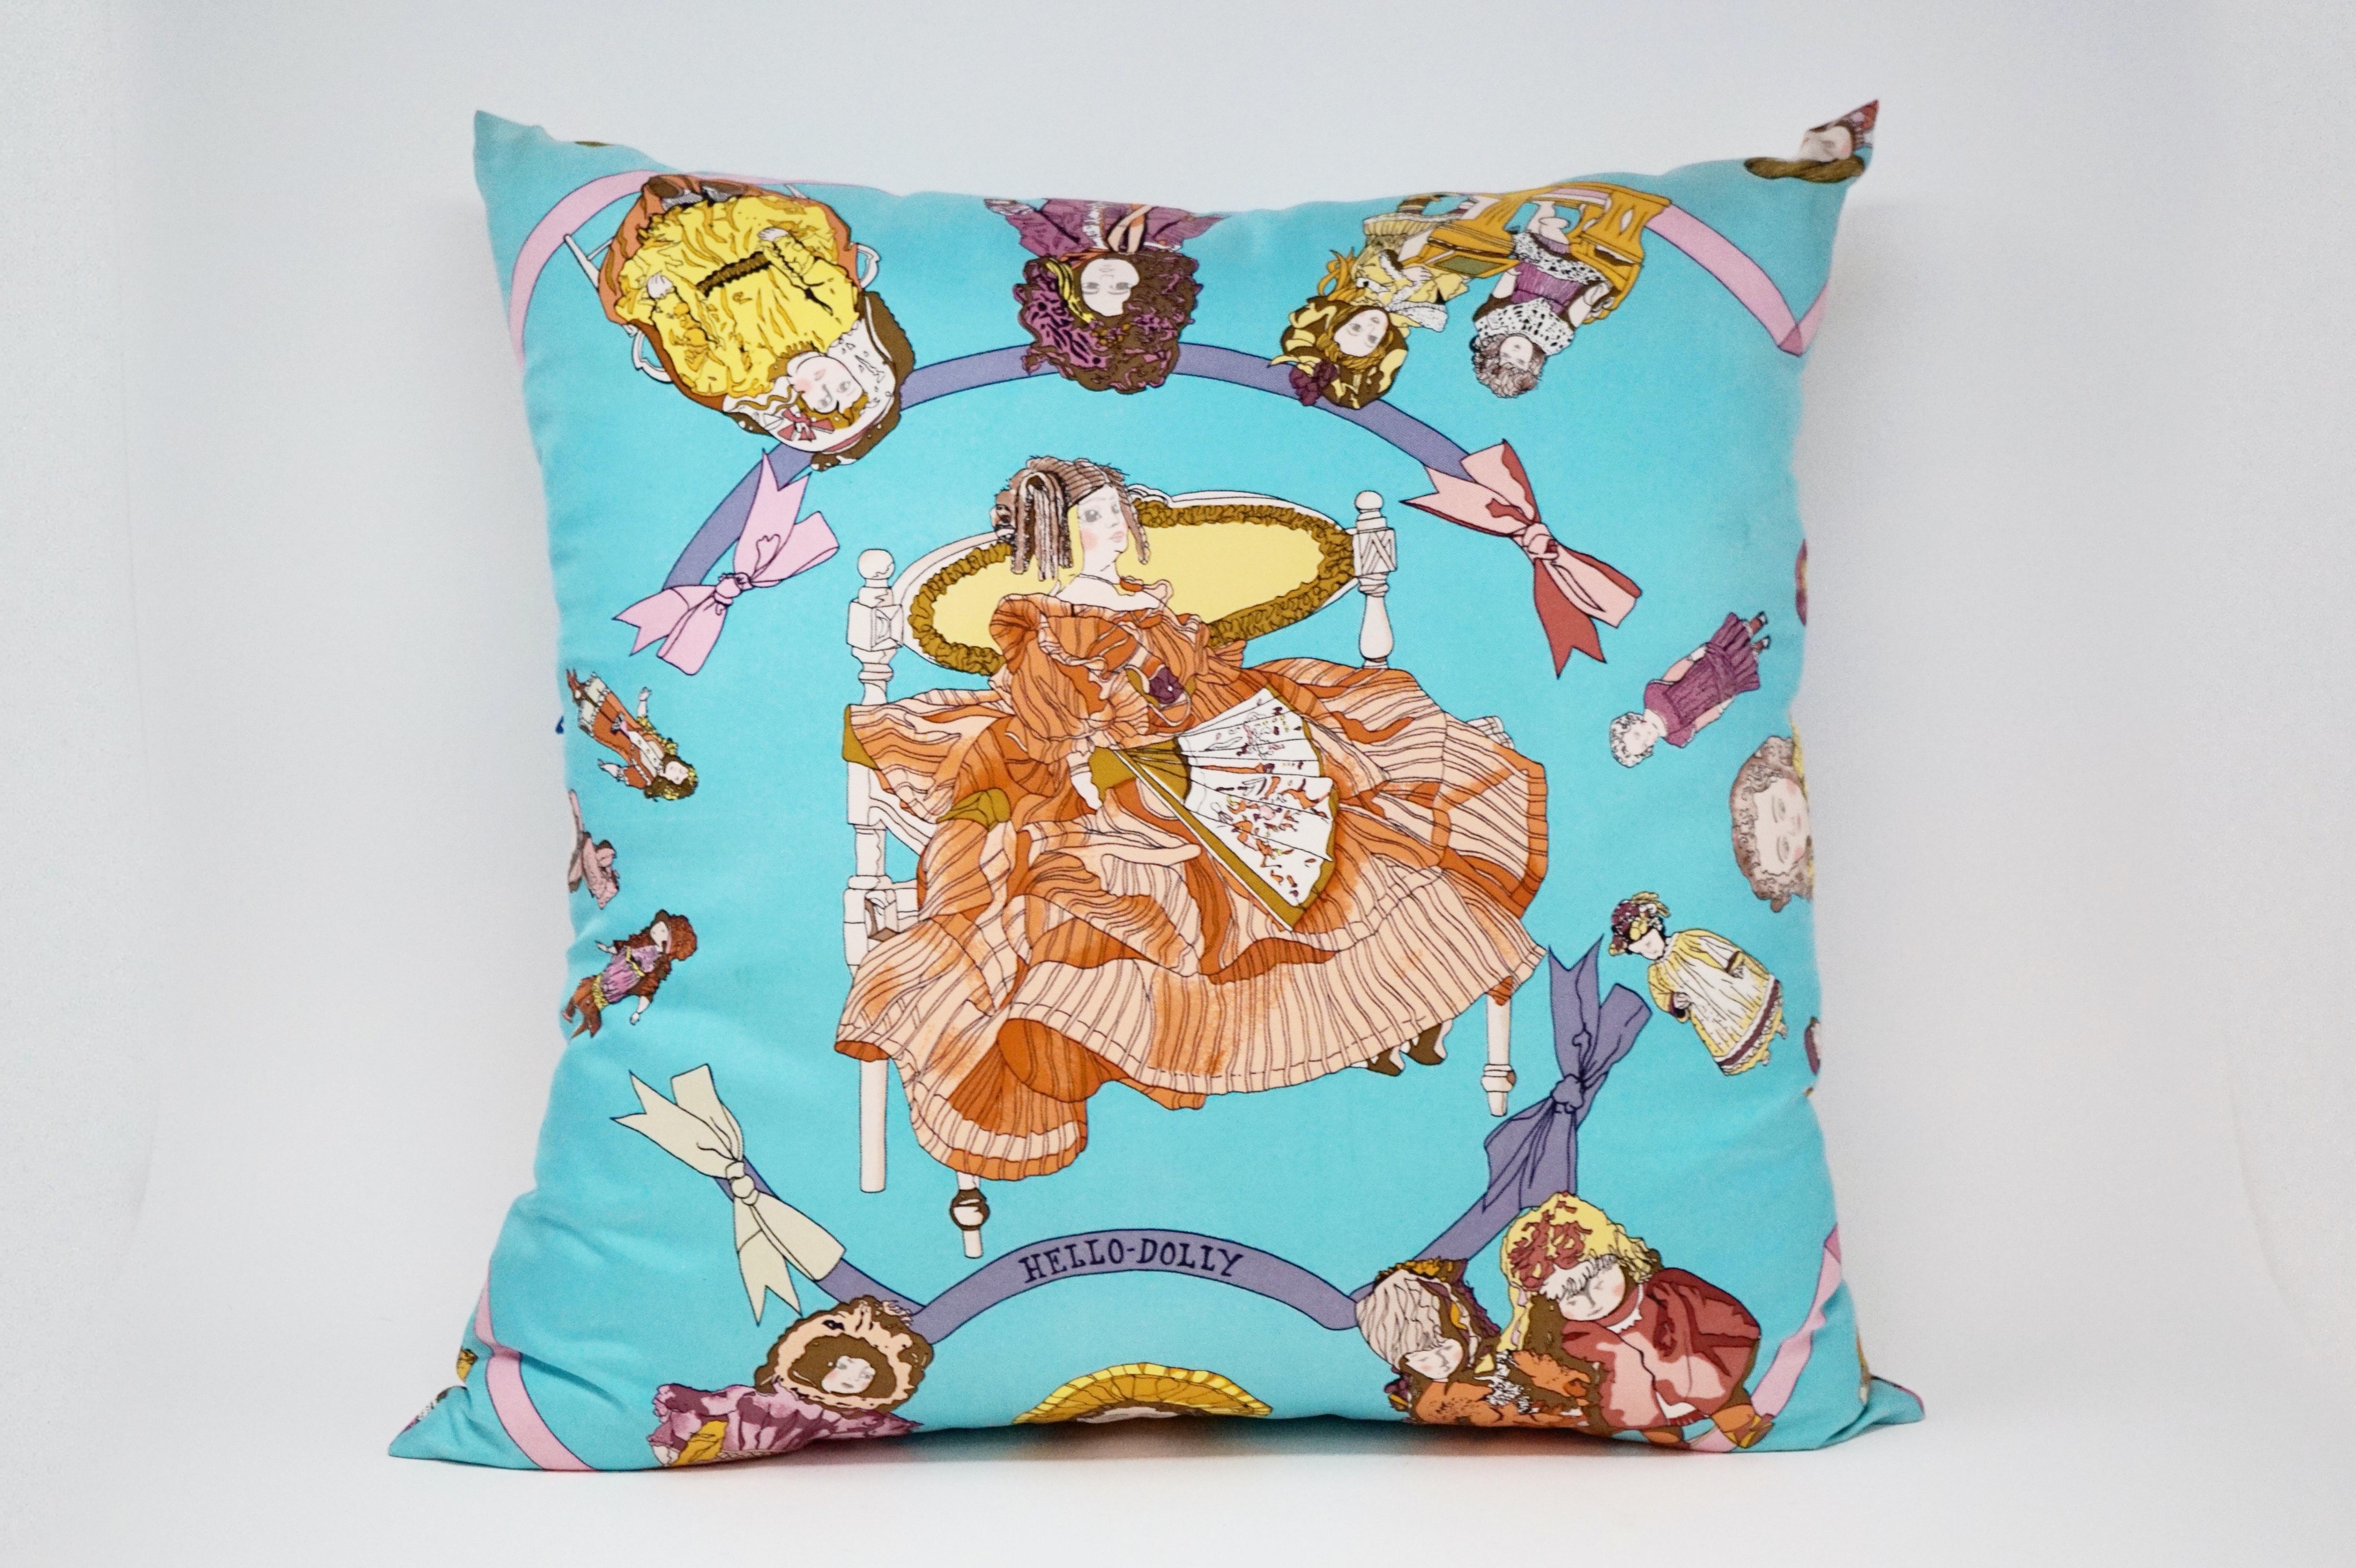 One-of-a-kind handmade custom luxury pillow crafted from a colorful and whimsical vintage 